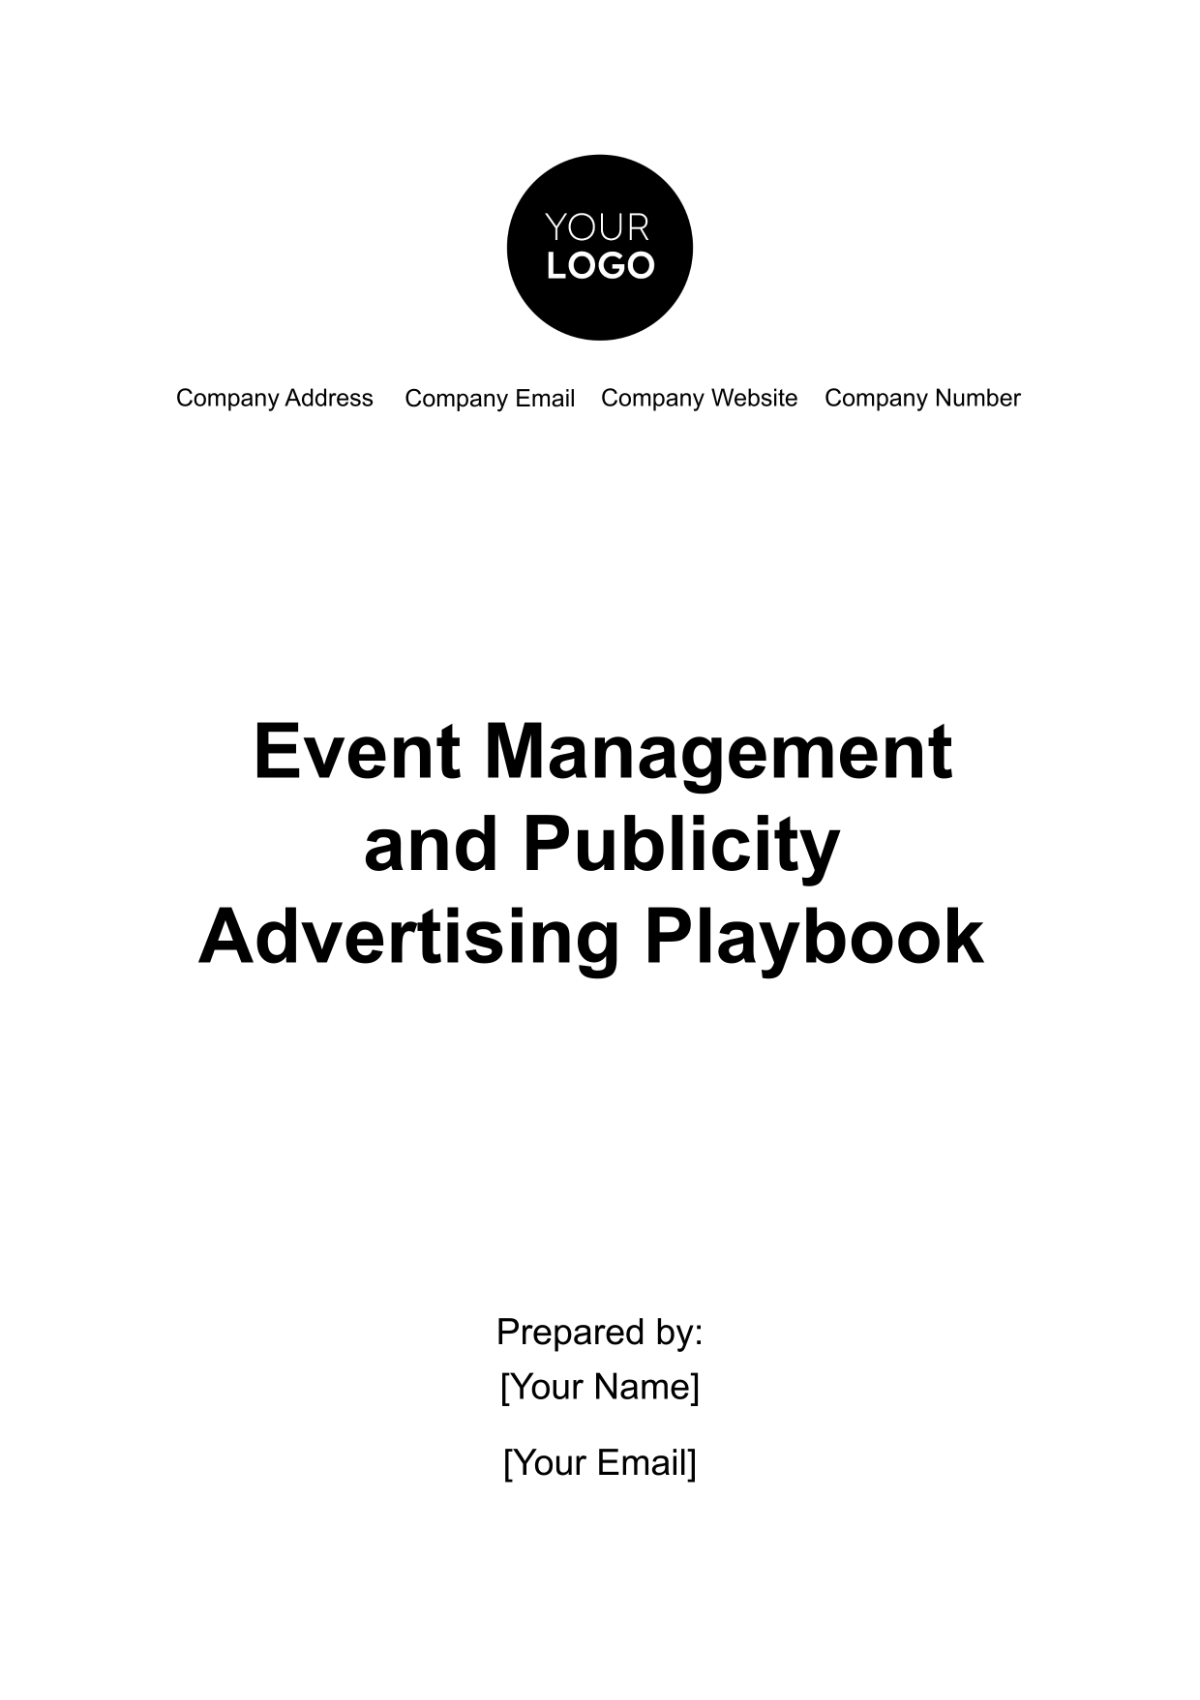 Event Management and Publicity Advertising Playbook Template